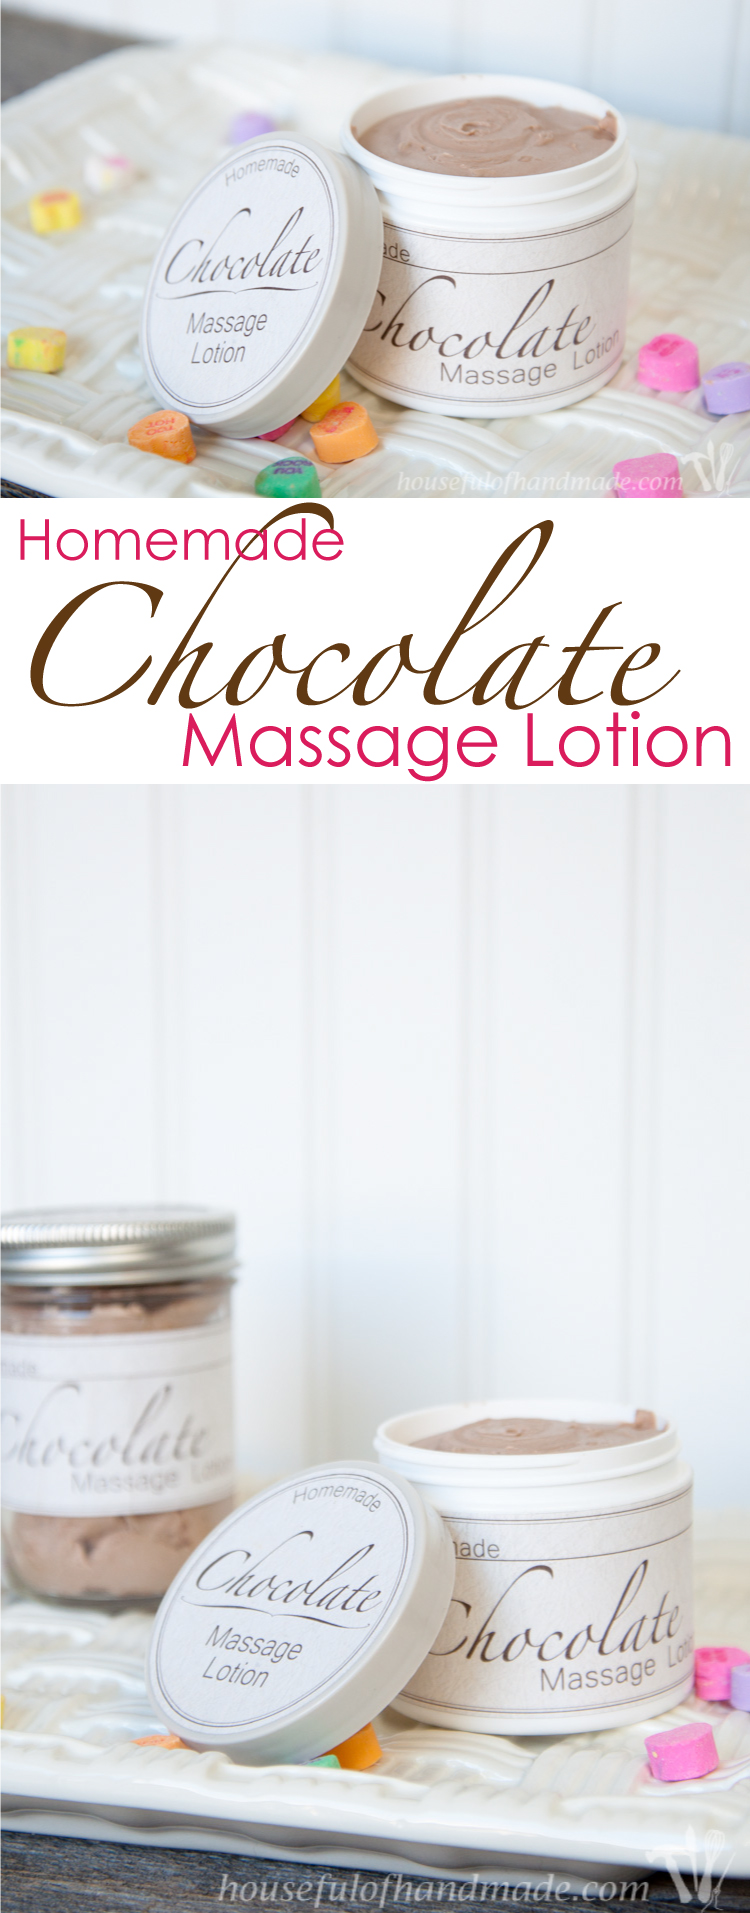 Celebrate Valentine's Day with your sweetheart with homemade chocolate massage lotion. | OHMY-CREATIVE.COM | Chocolate Massage | Chocolate Lotion | Chocolate Body Lotion | Massage Cream | Chocolate Massage Cream | Romantic Gift 